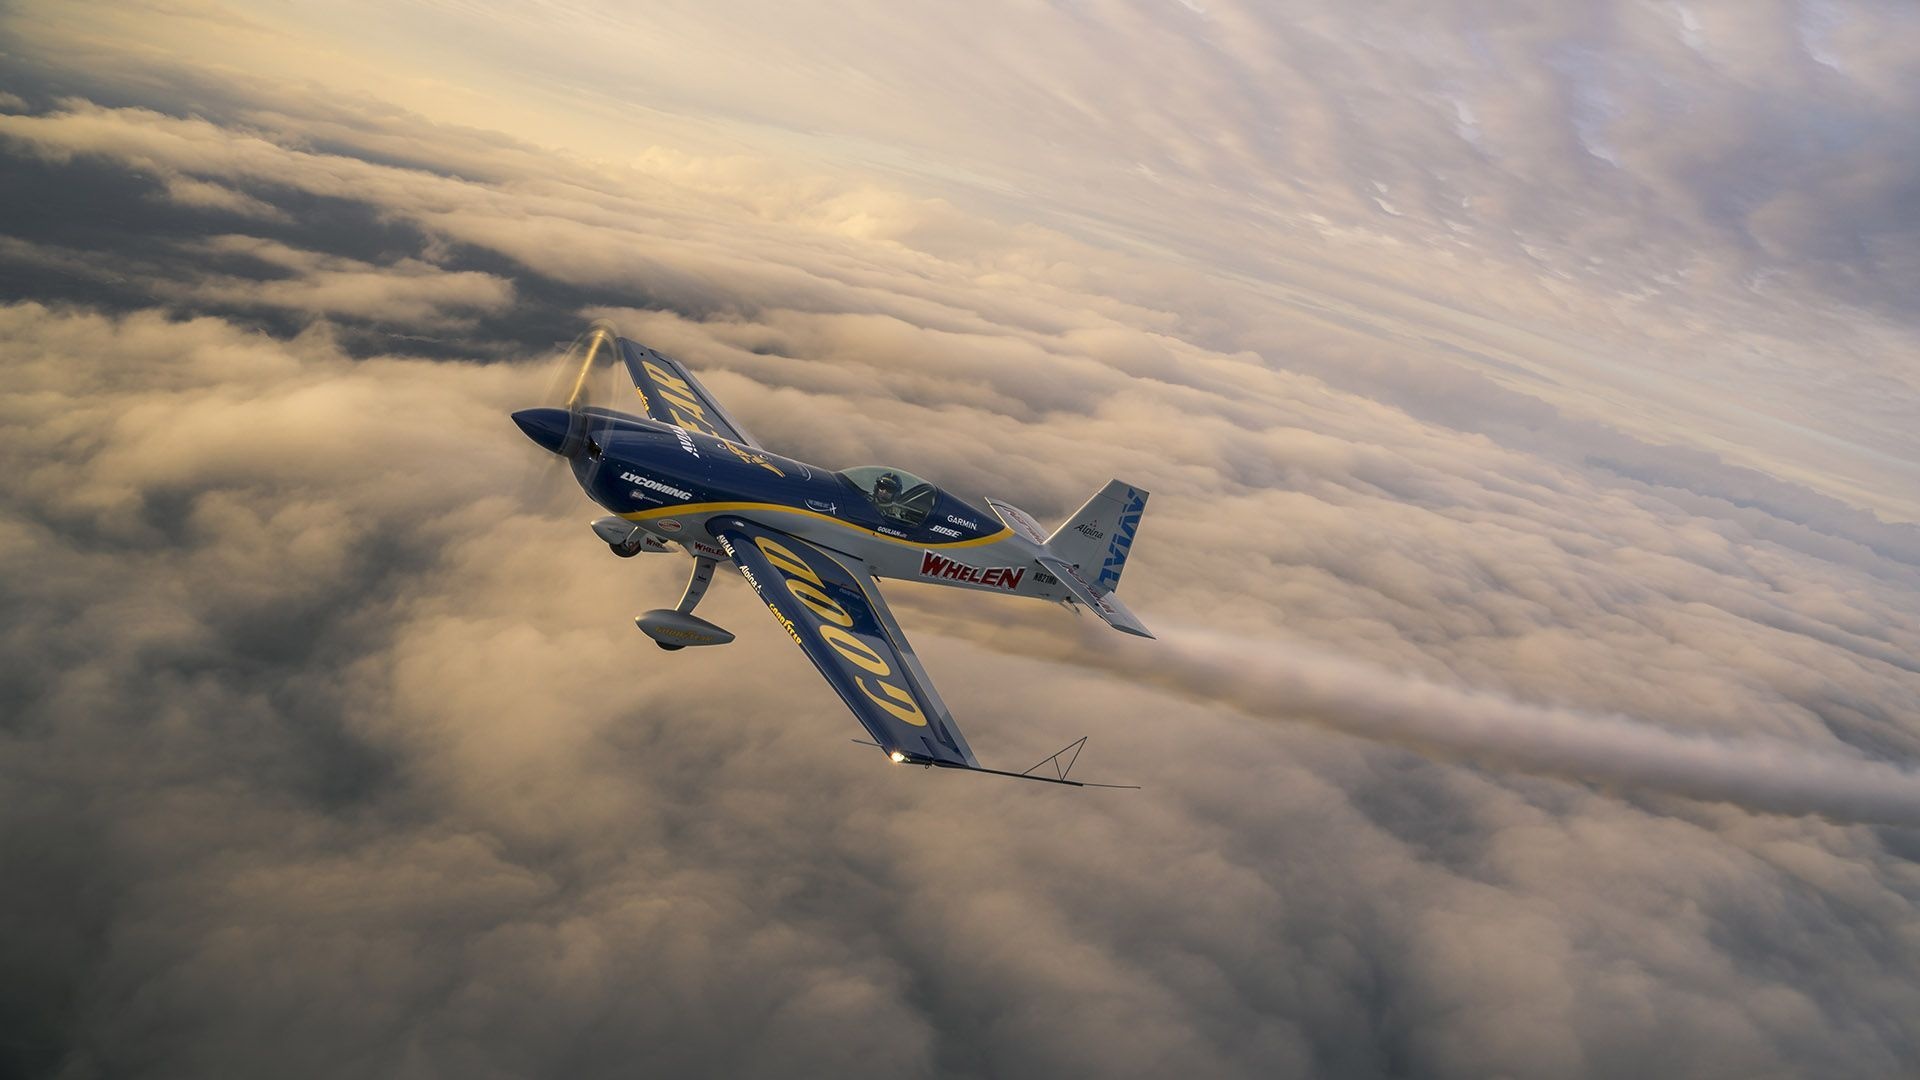 Air Racing: Red Bull Air Race aircraft competition event, Ultralight aviation. 1920x1080 Full HD Wallpaper.